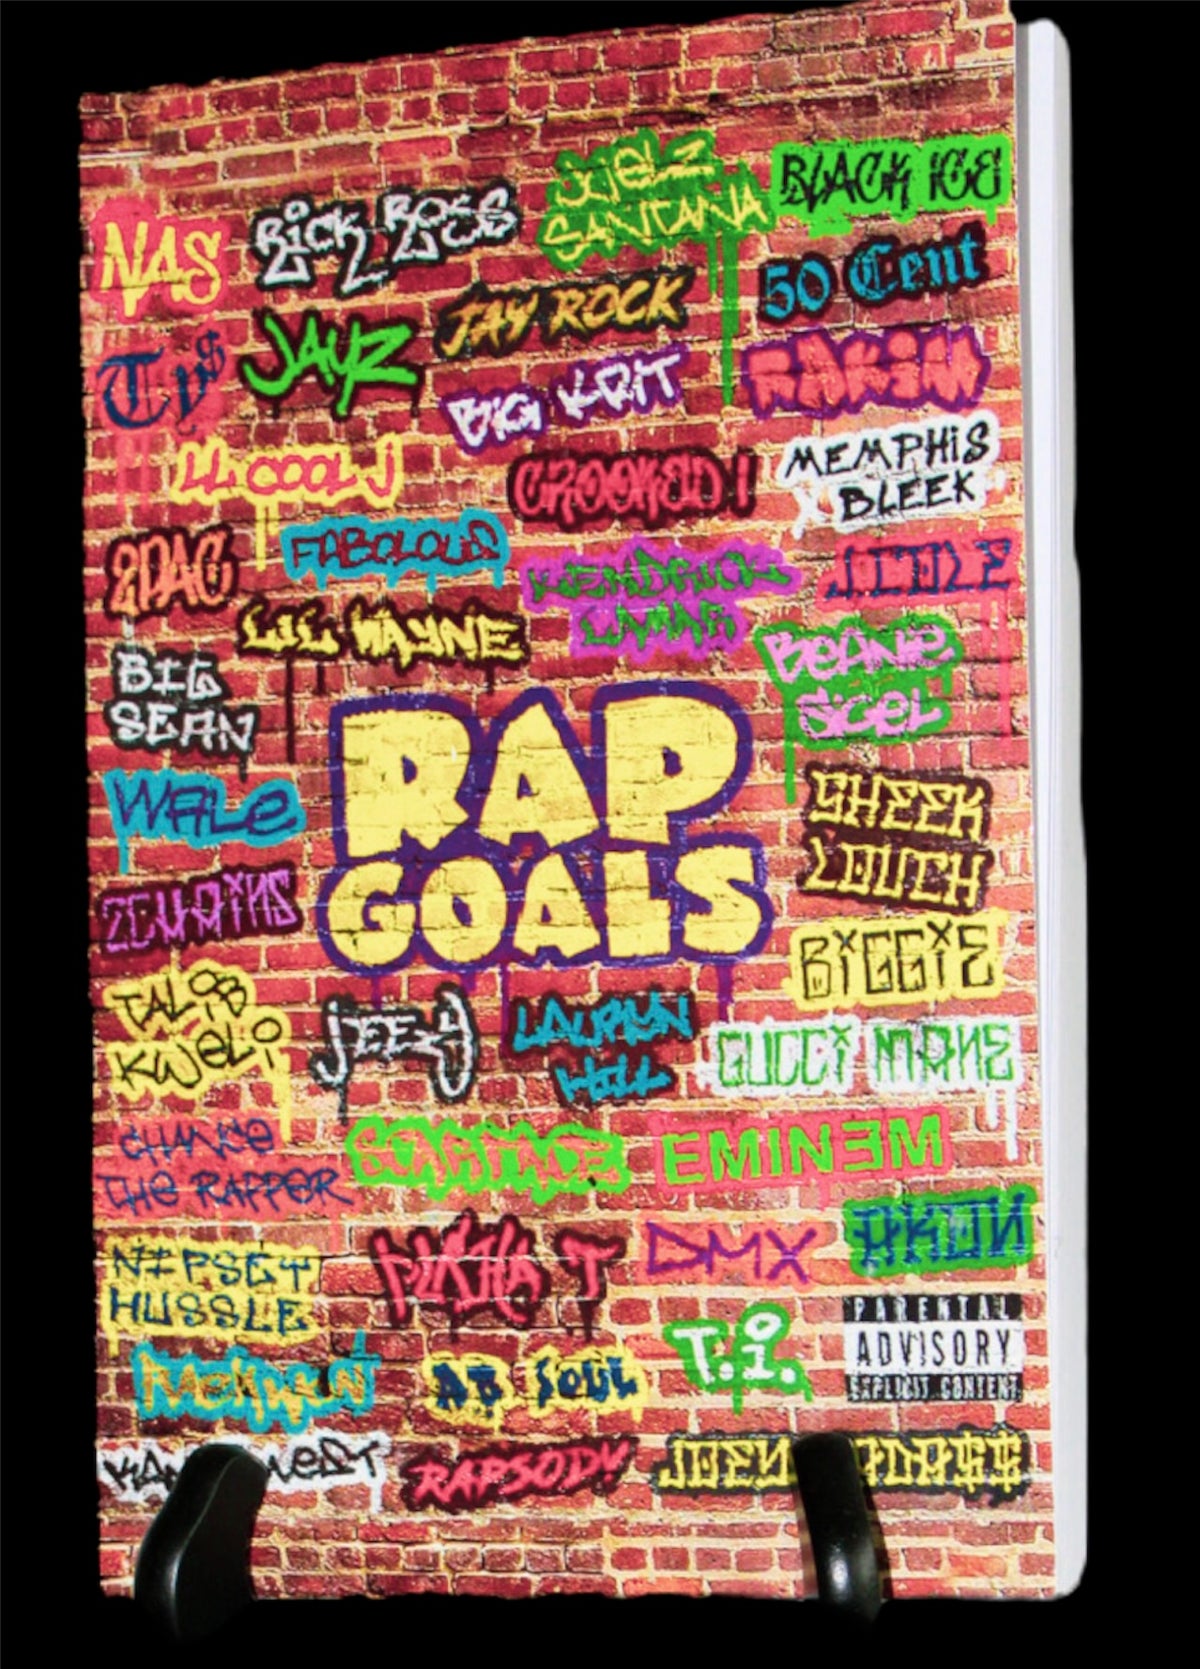 Rap Goals- A 365 Day Guide To Success